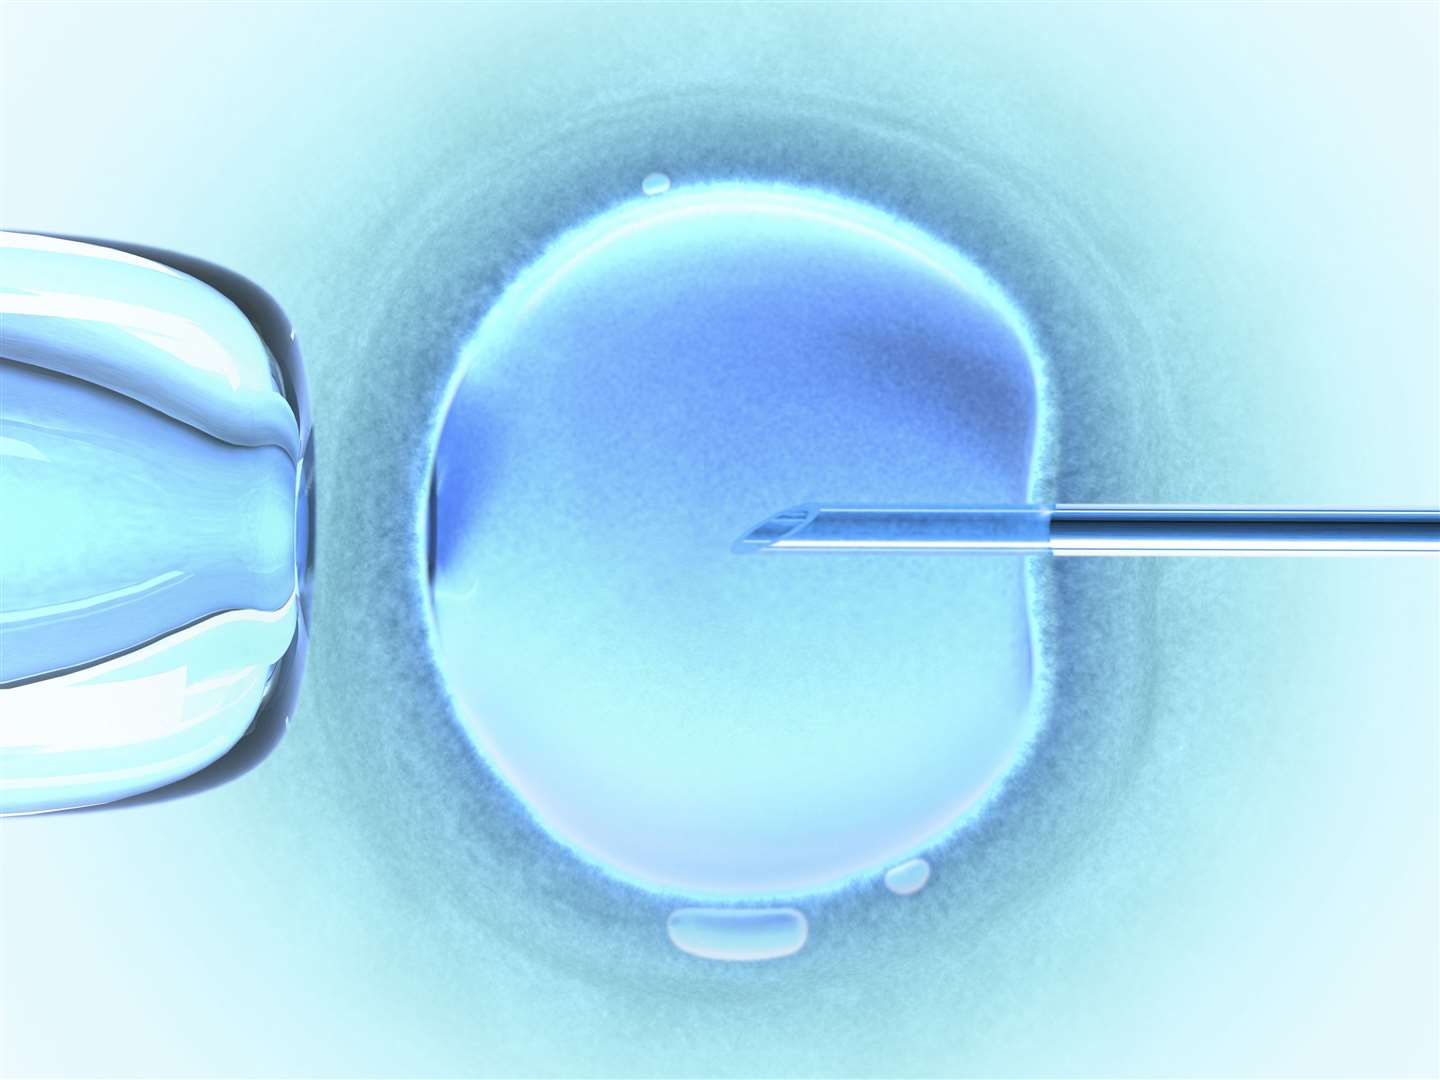 IVF treatment has been discussed by CCGs. Stock image